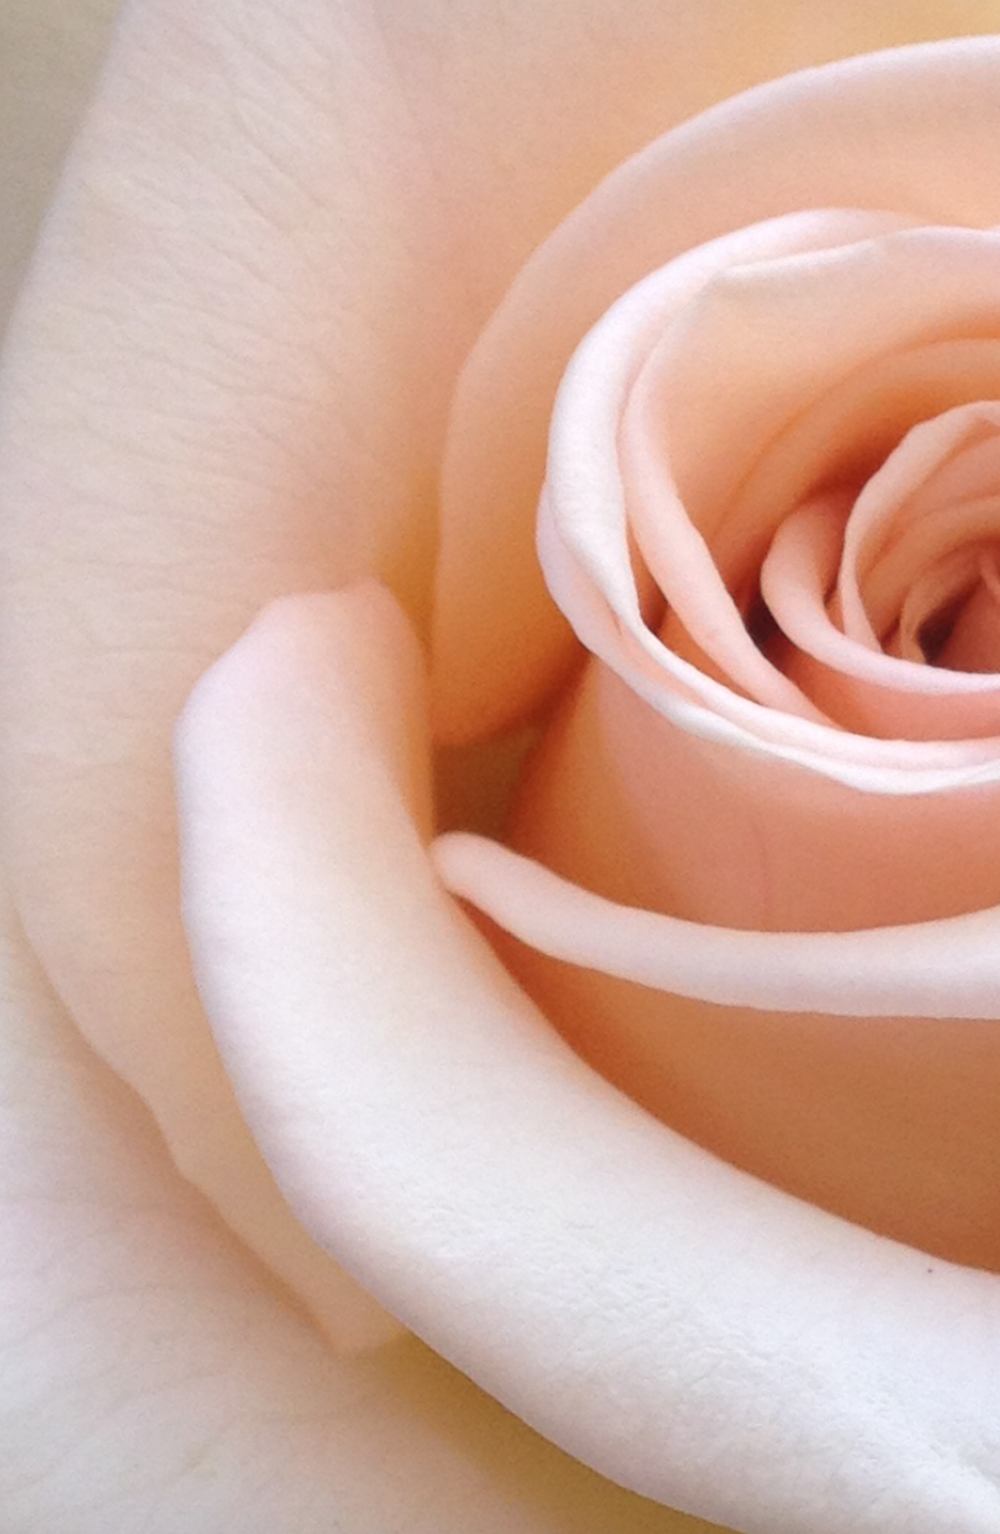 Peach Rose Picture. Download Free Image